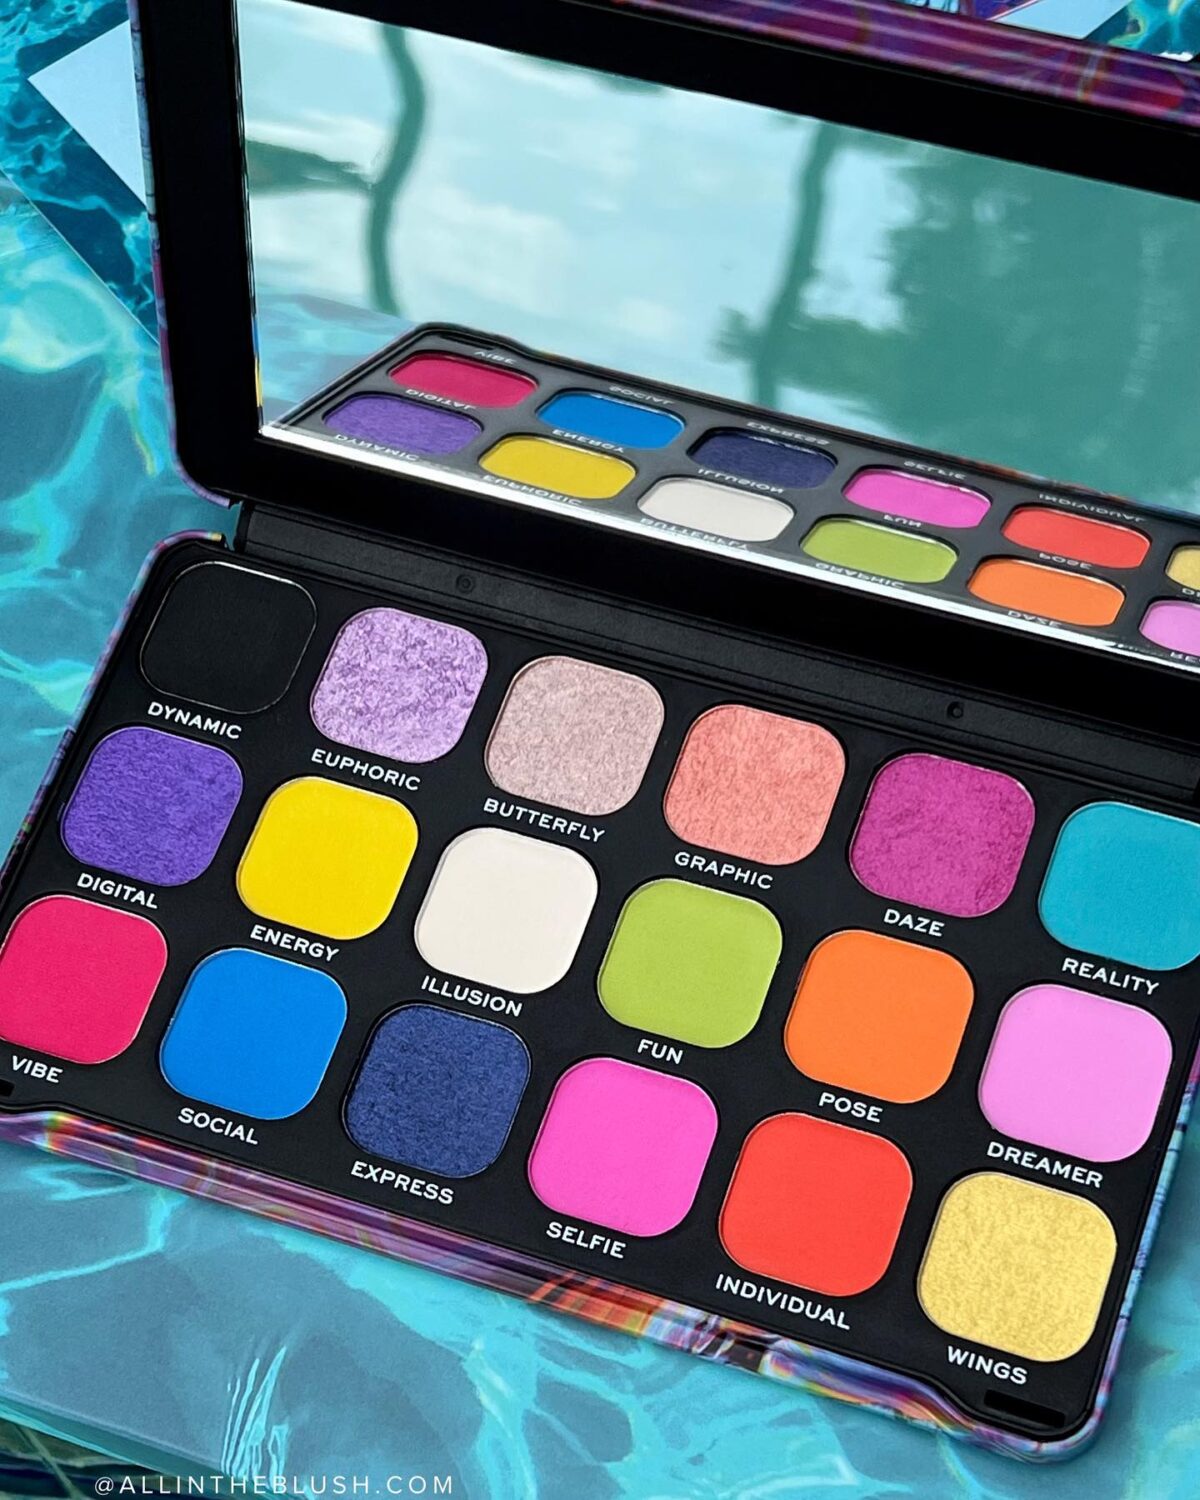 NEW from Makeup Revolution: The Forever Flawless Digi Butterfly Eyeshadow Palette